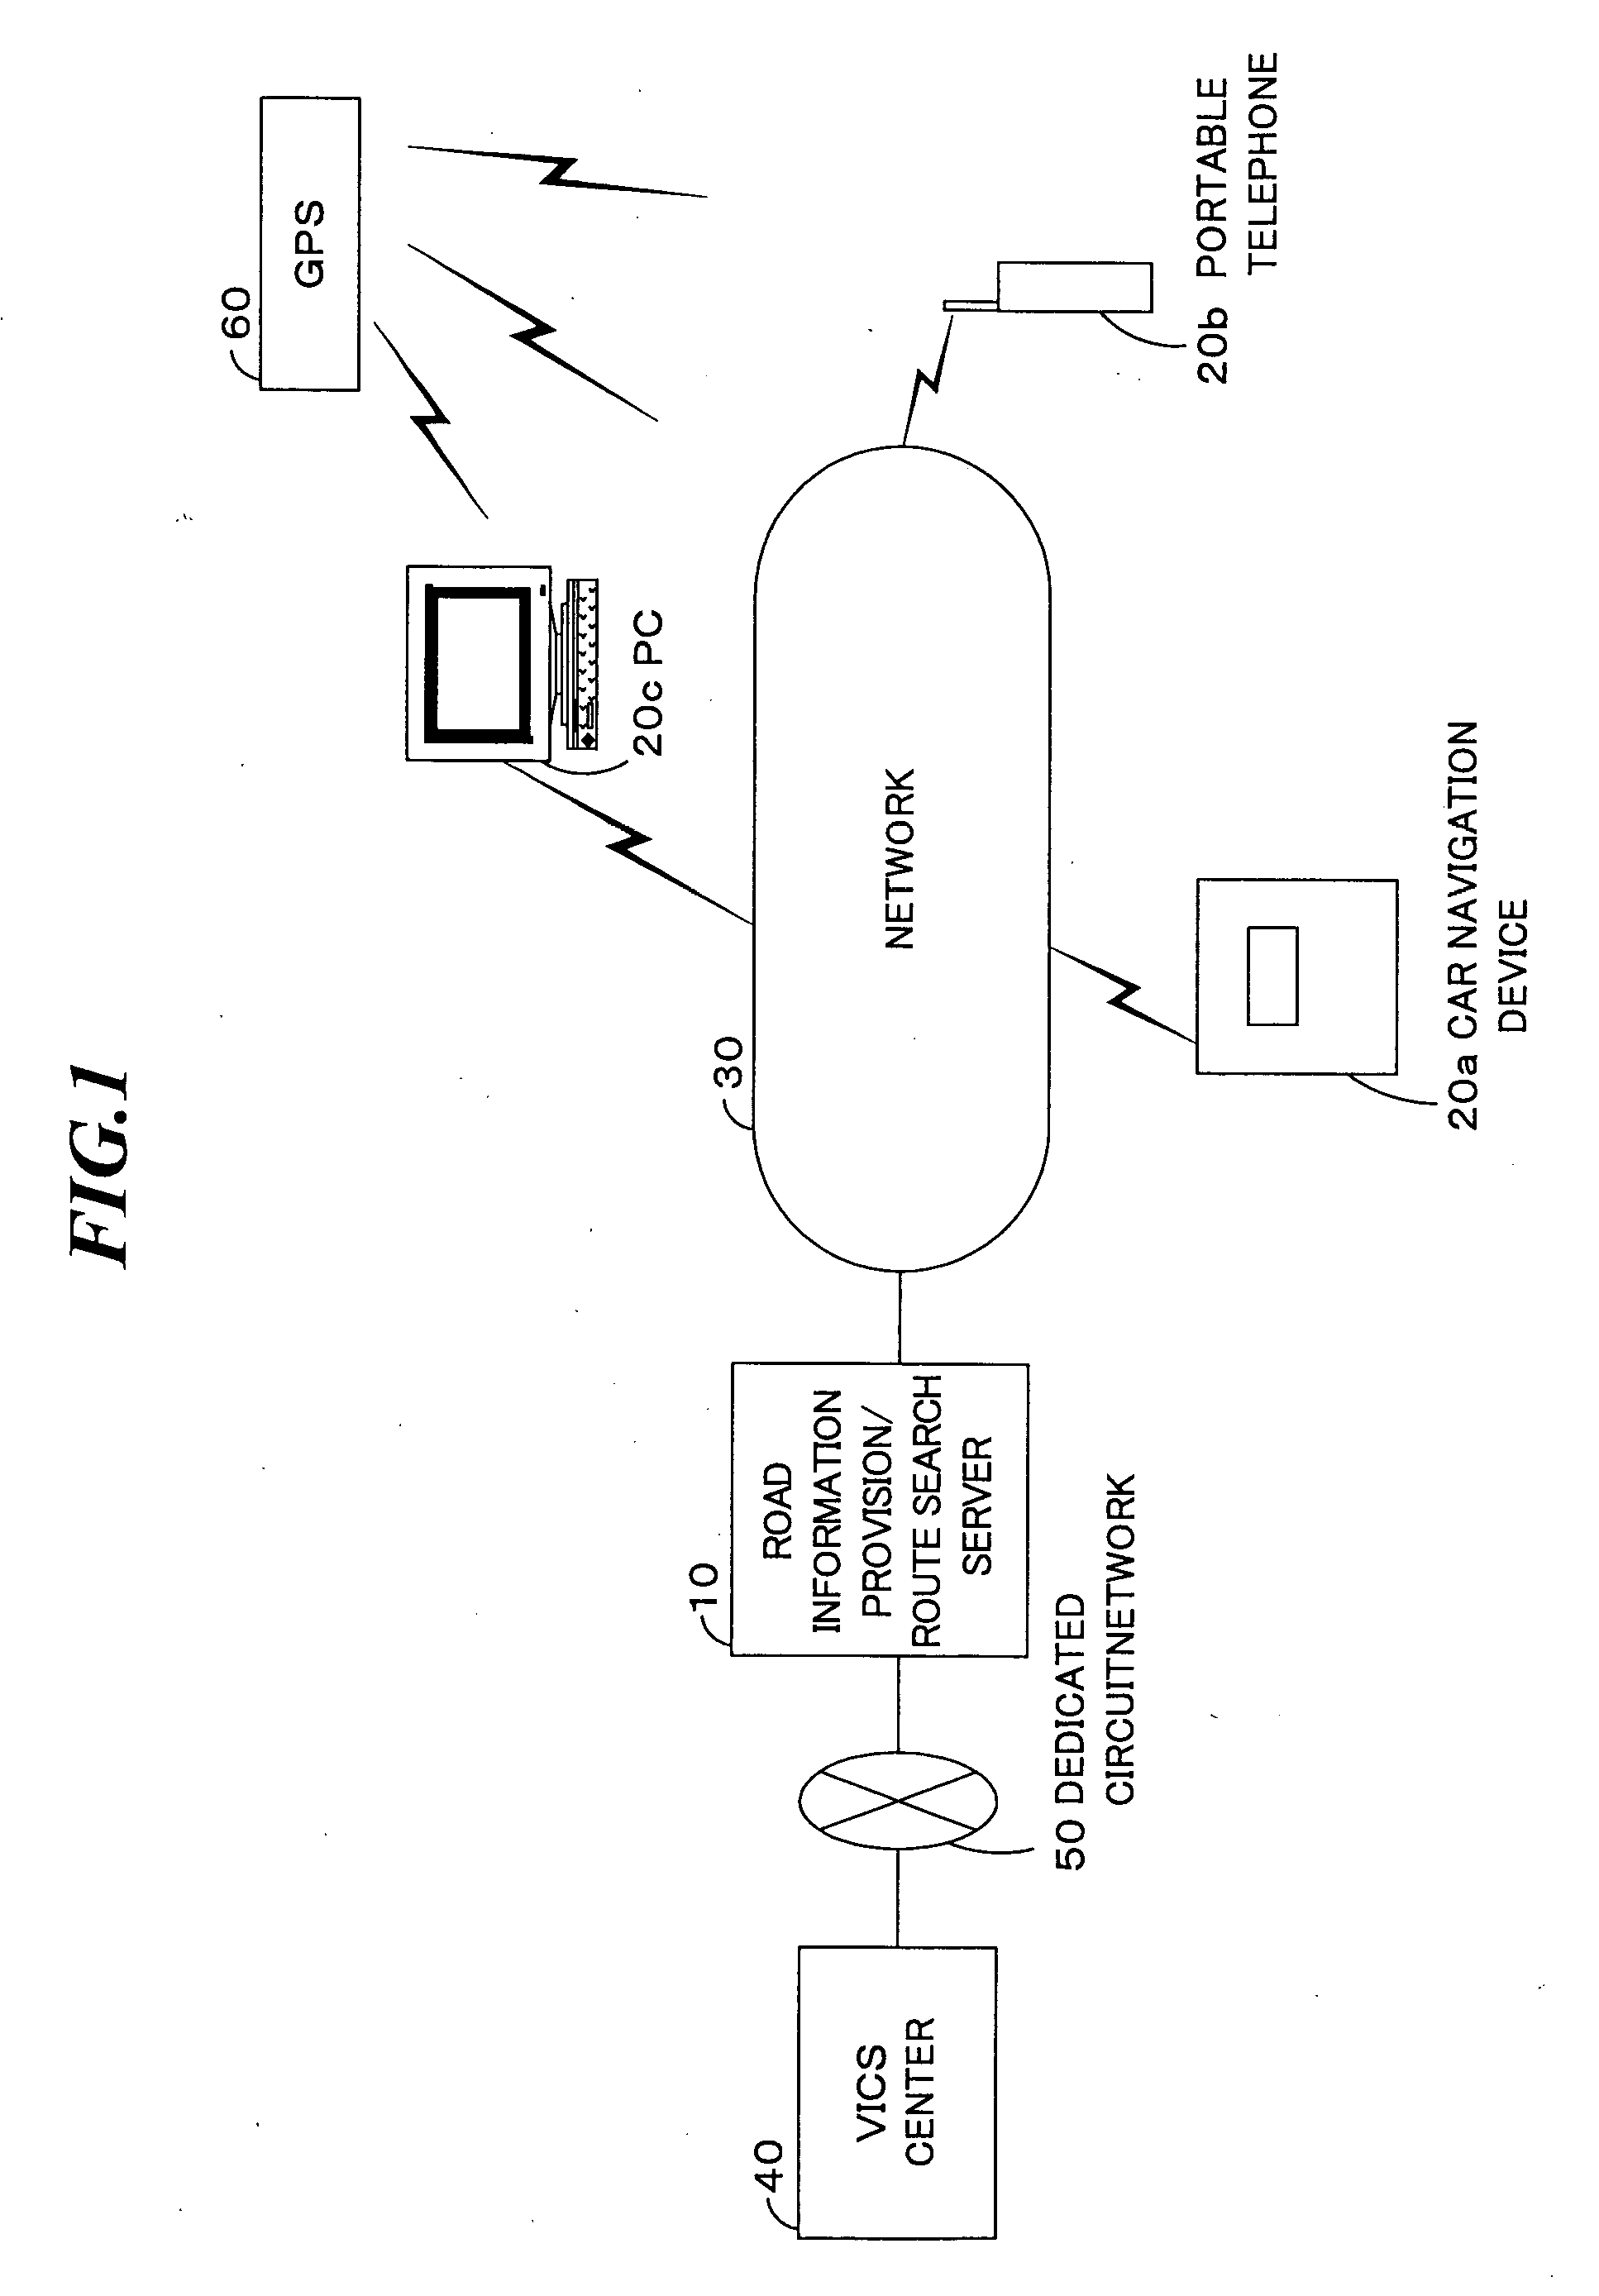 Road information providing server, road information providing system, road information providing method, route search server, route search system, and route search method